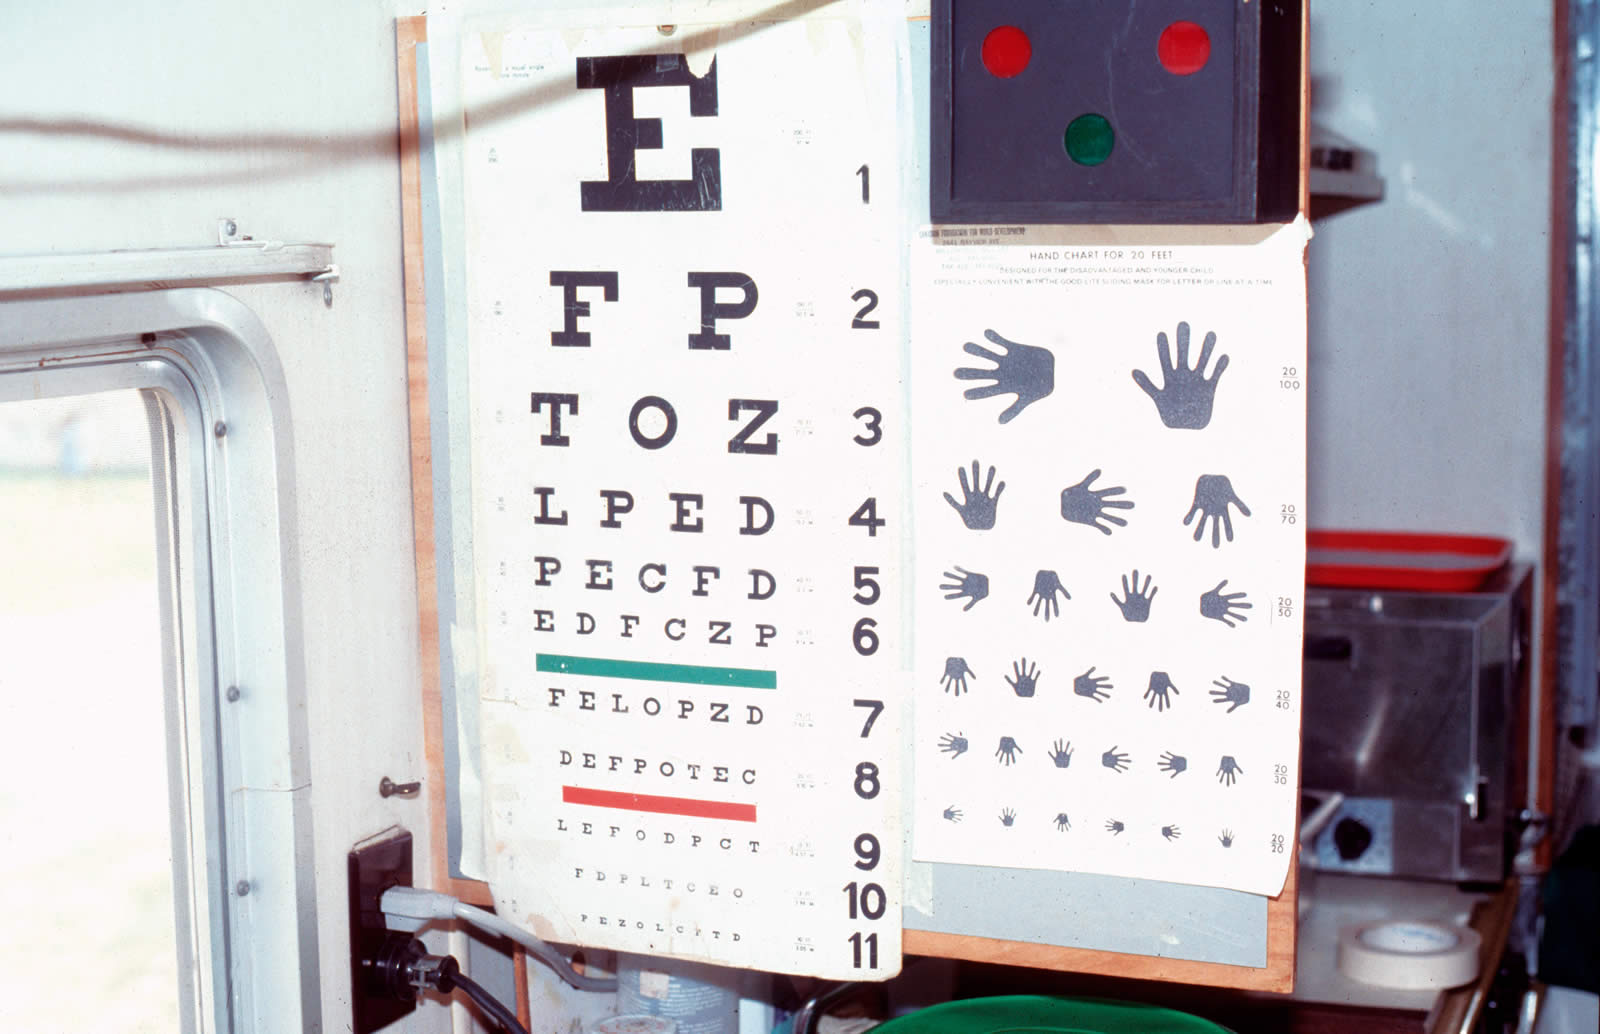 6 6 Vision Test Chart